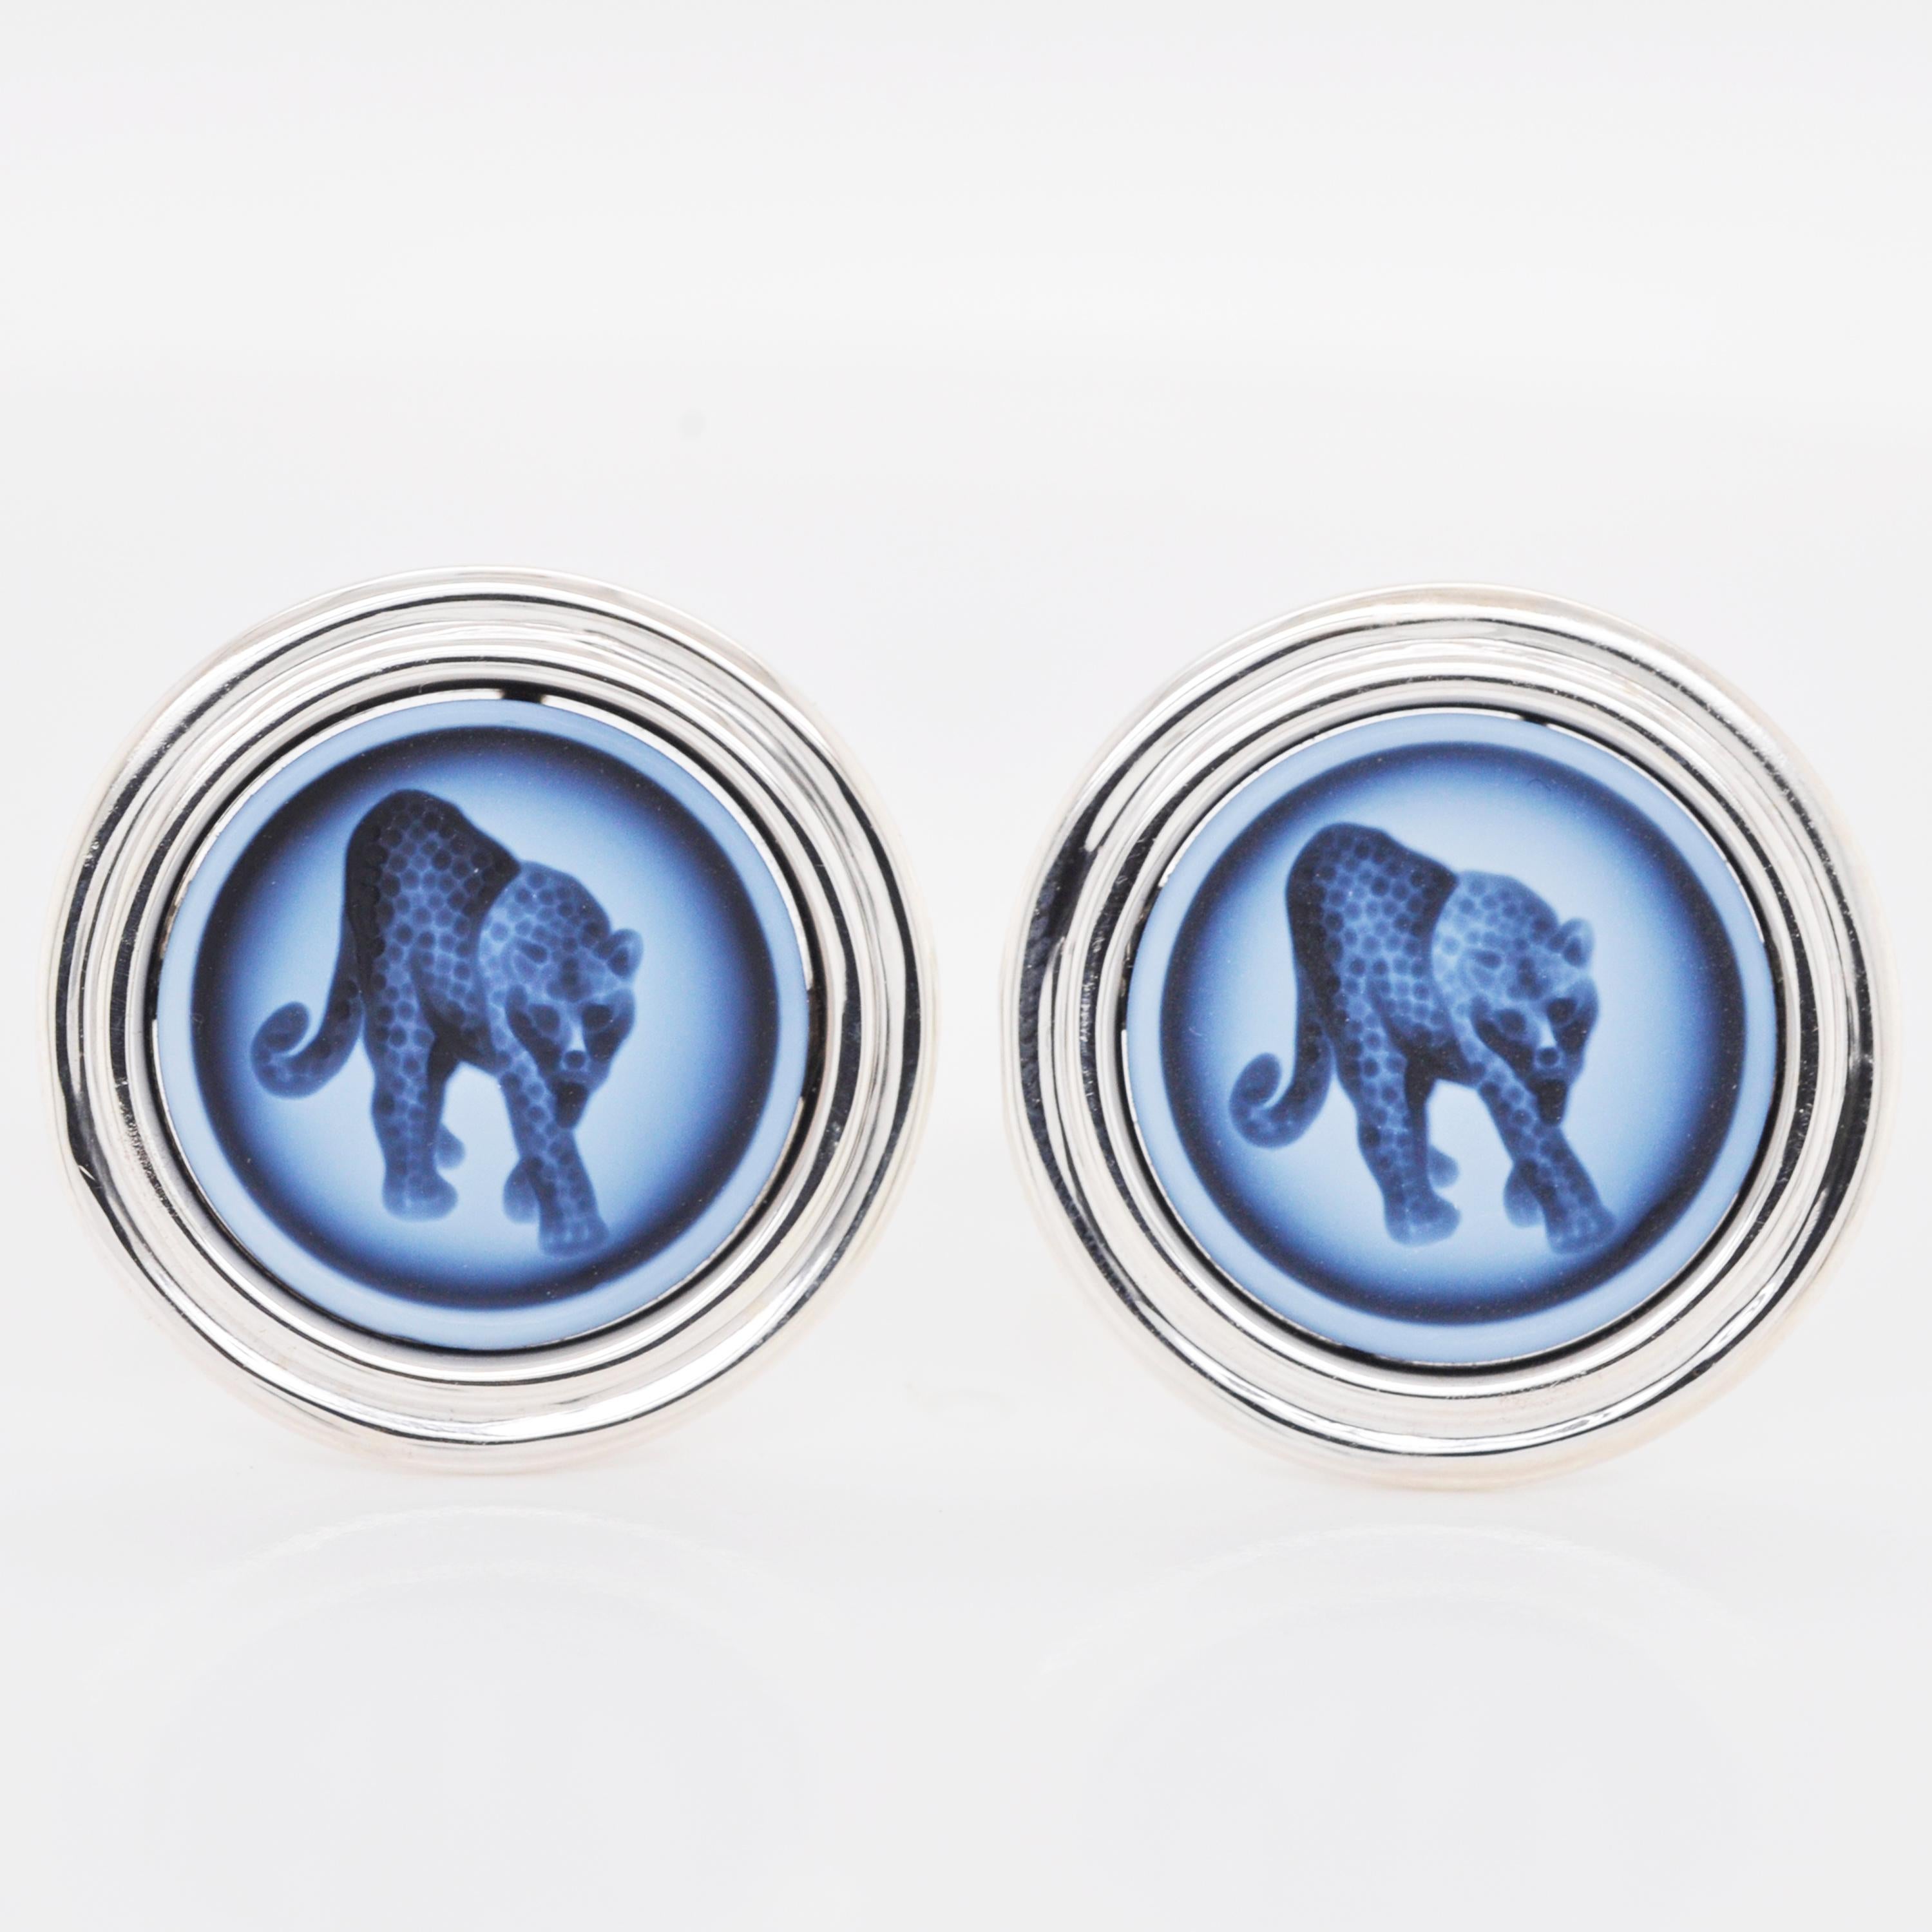 92.5 Sterling Silver Leopard Intaglio Agate Cameo Carving Cufflinks

These high quality cufflinks exhibit extremely high quality of craftsmanship. On the relief of Natural agate, the leopard is carved inside for the intaglio effect. The remarkable